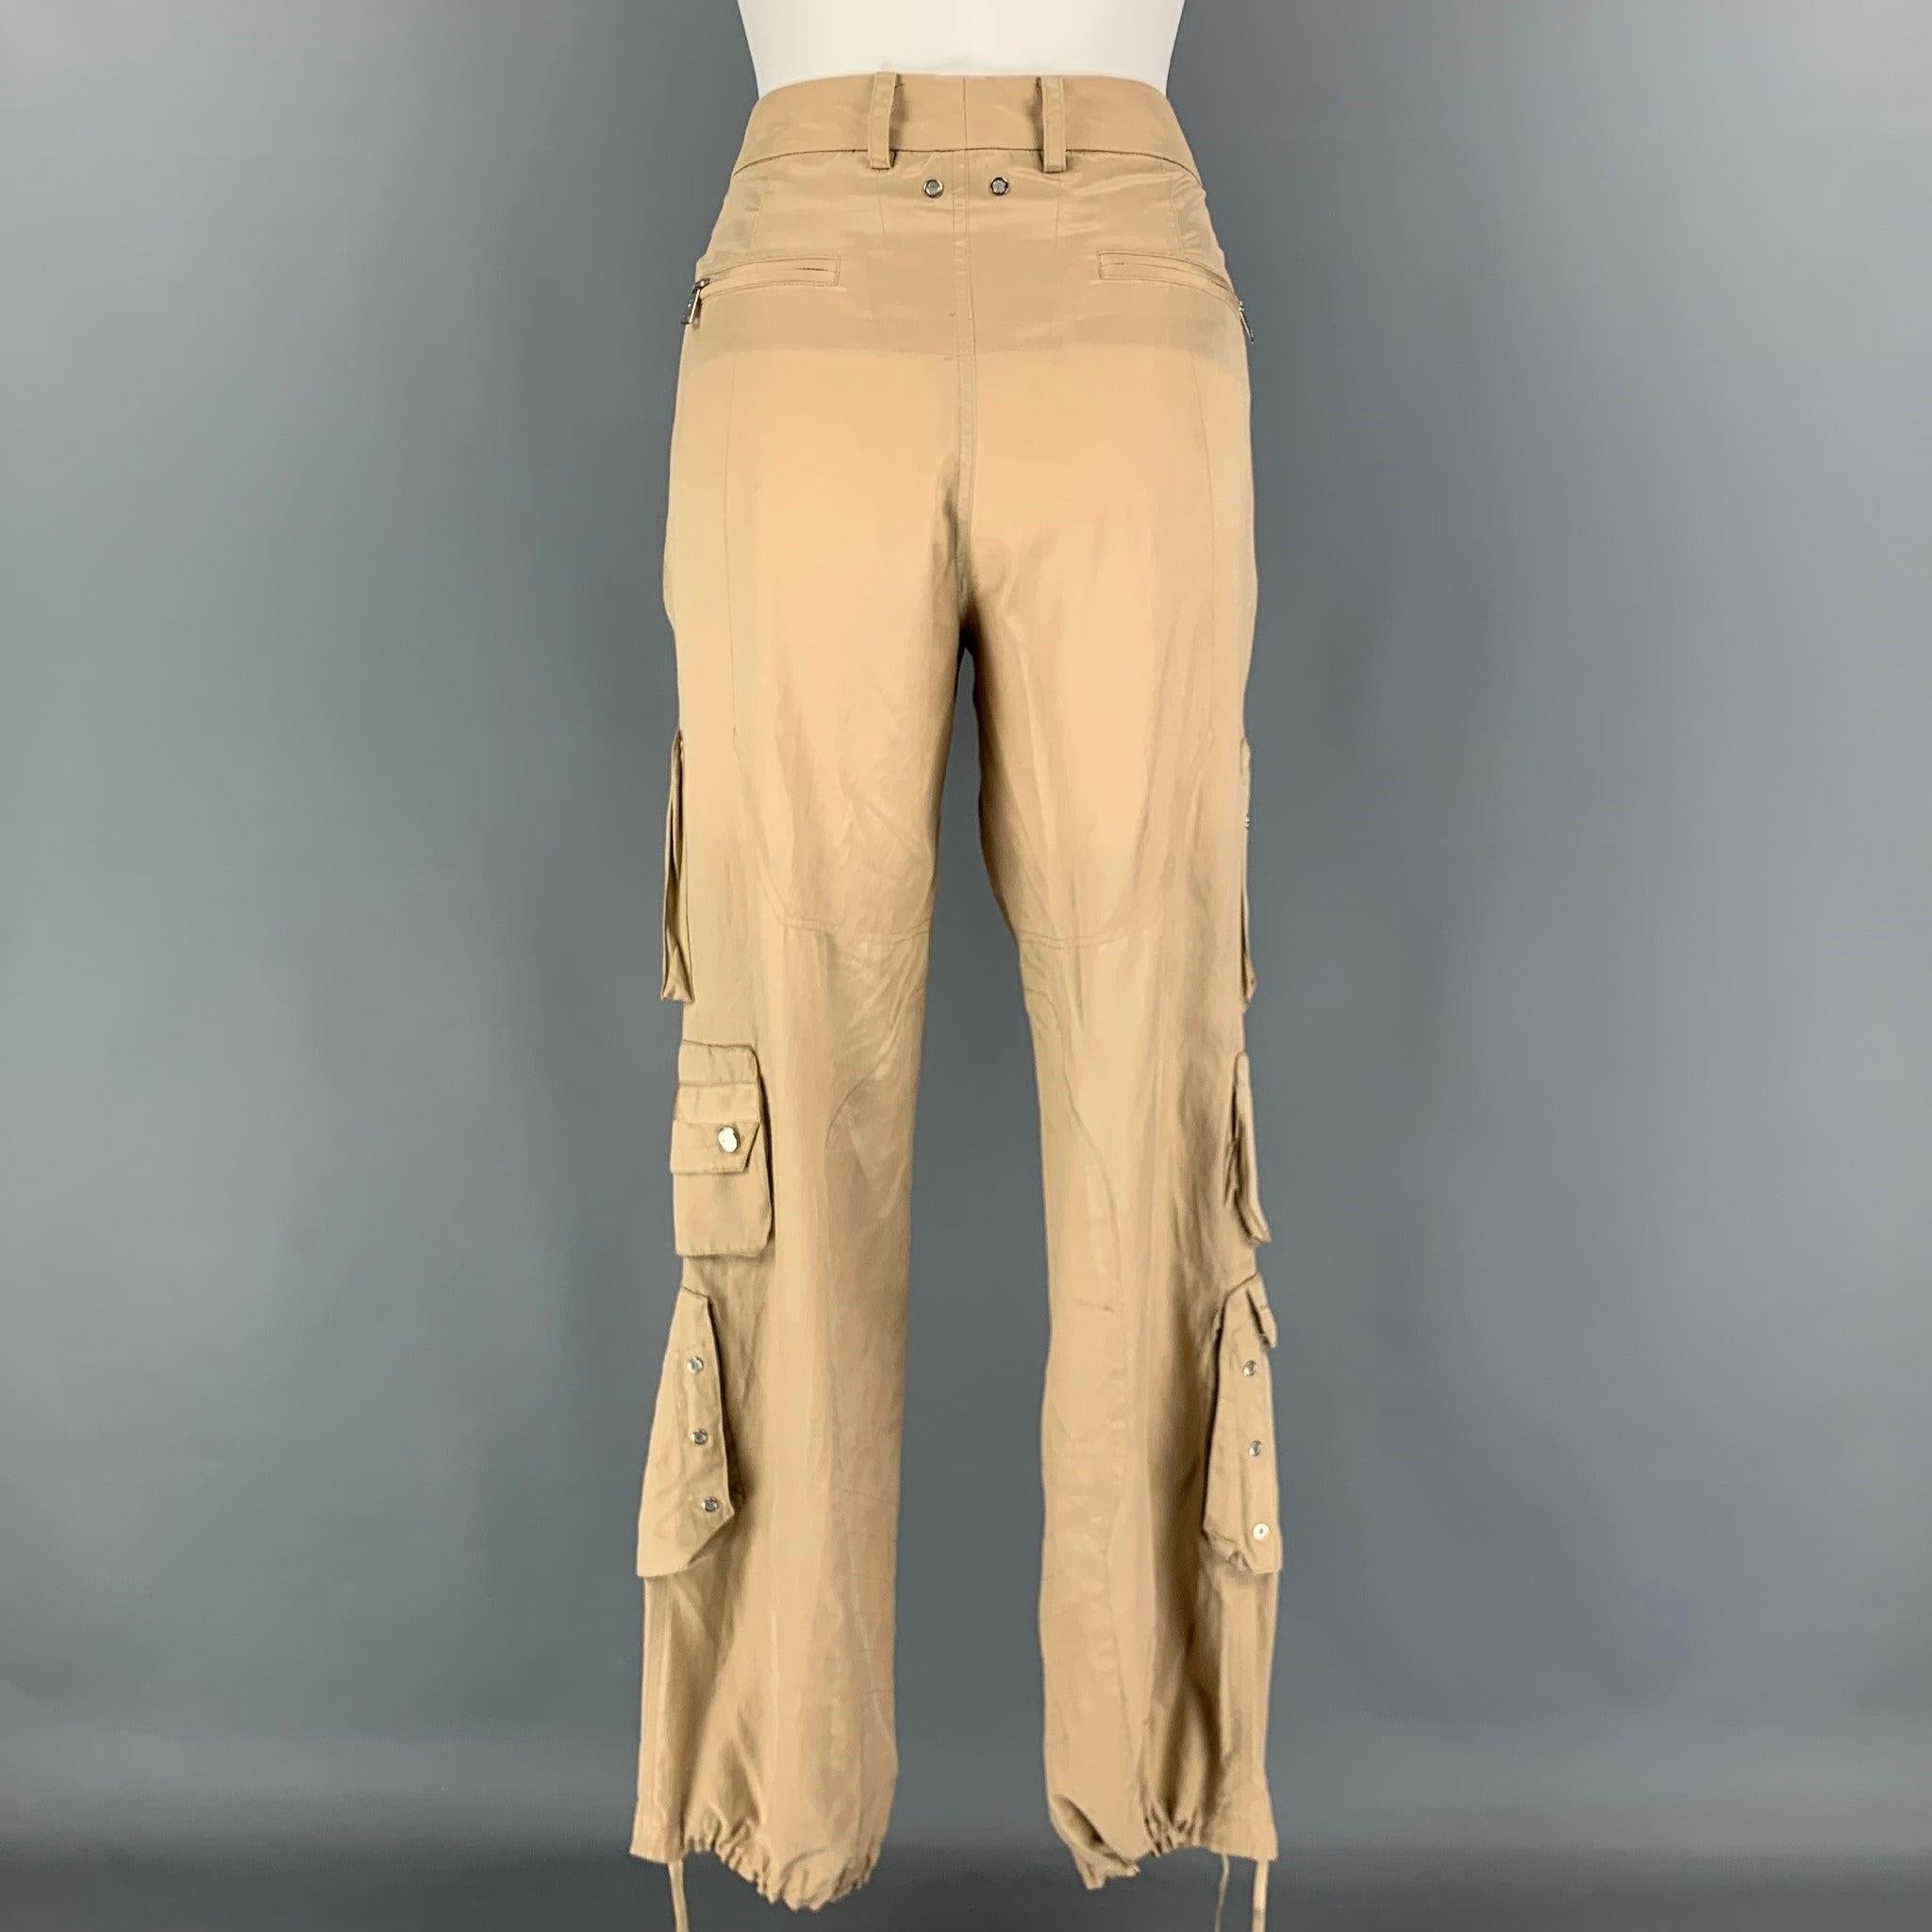 RALPH LAUREN Black Label Size 6 Beige Silk Cotton Shiny Cargo Casual Pants In Good Condition For Sale In San Francisco, CA